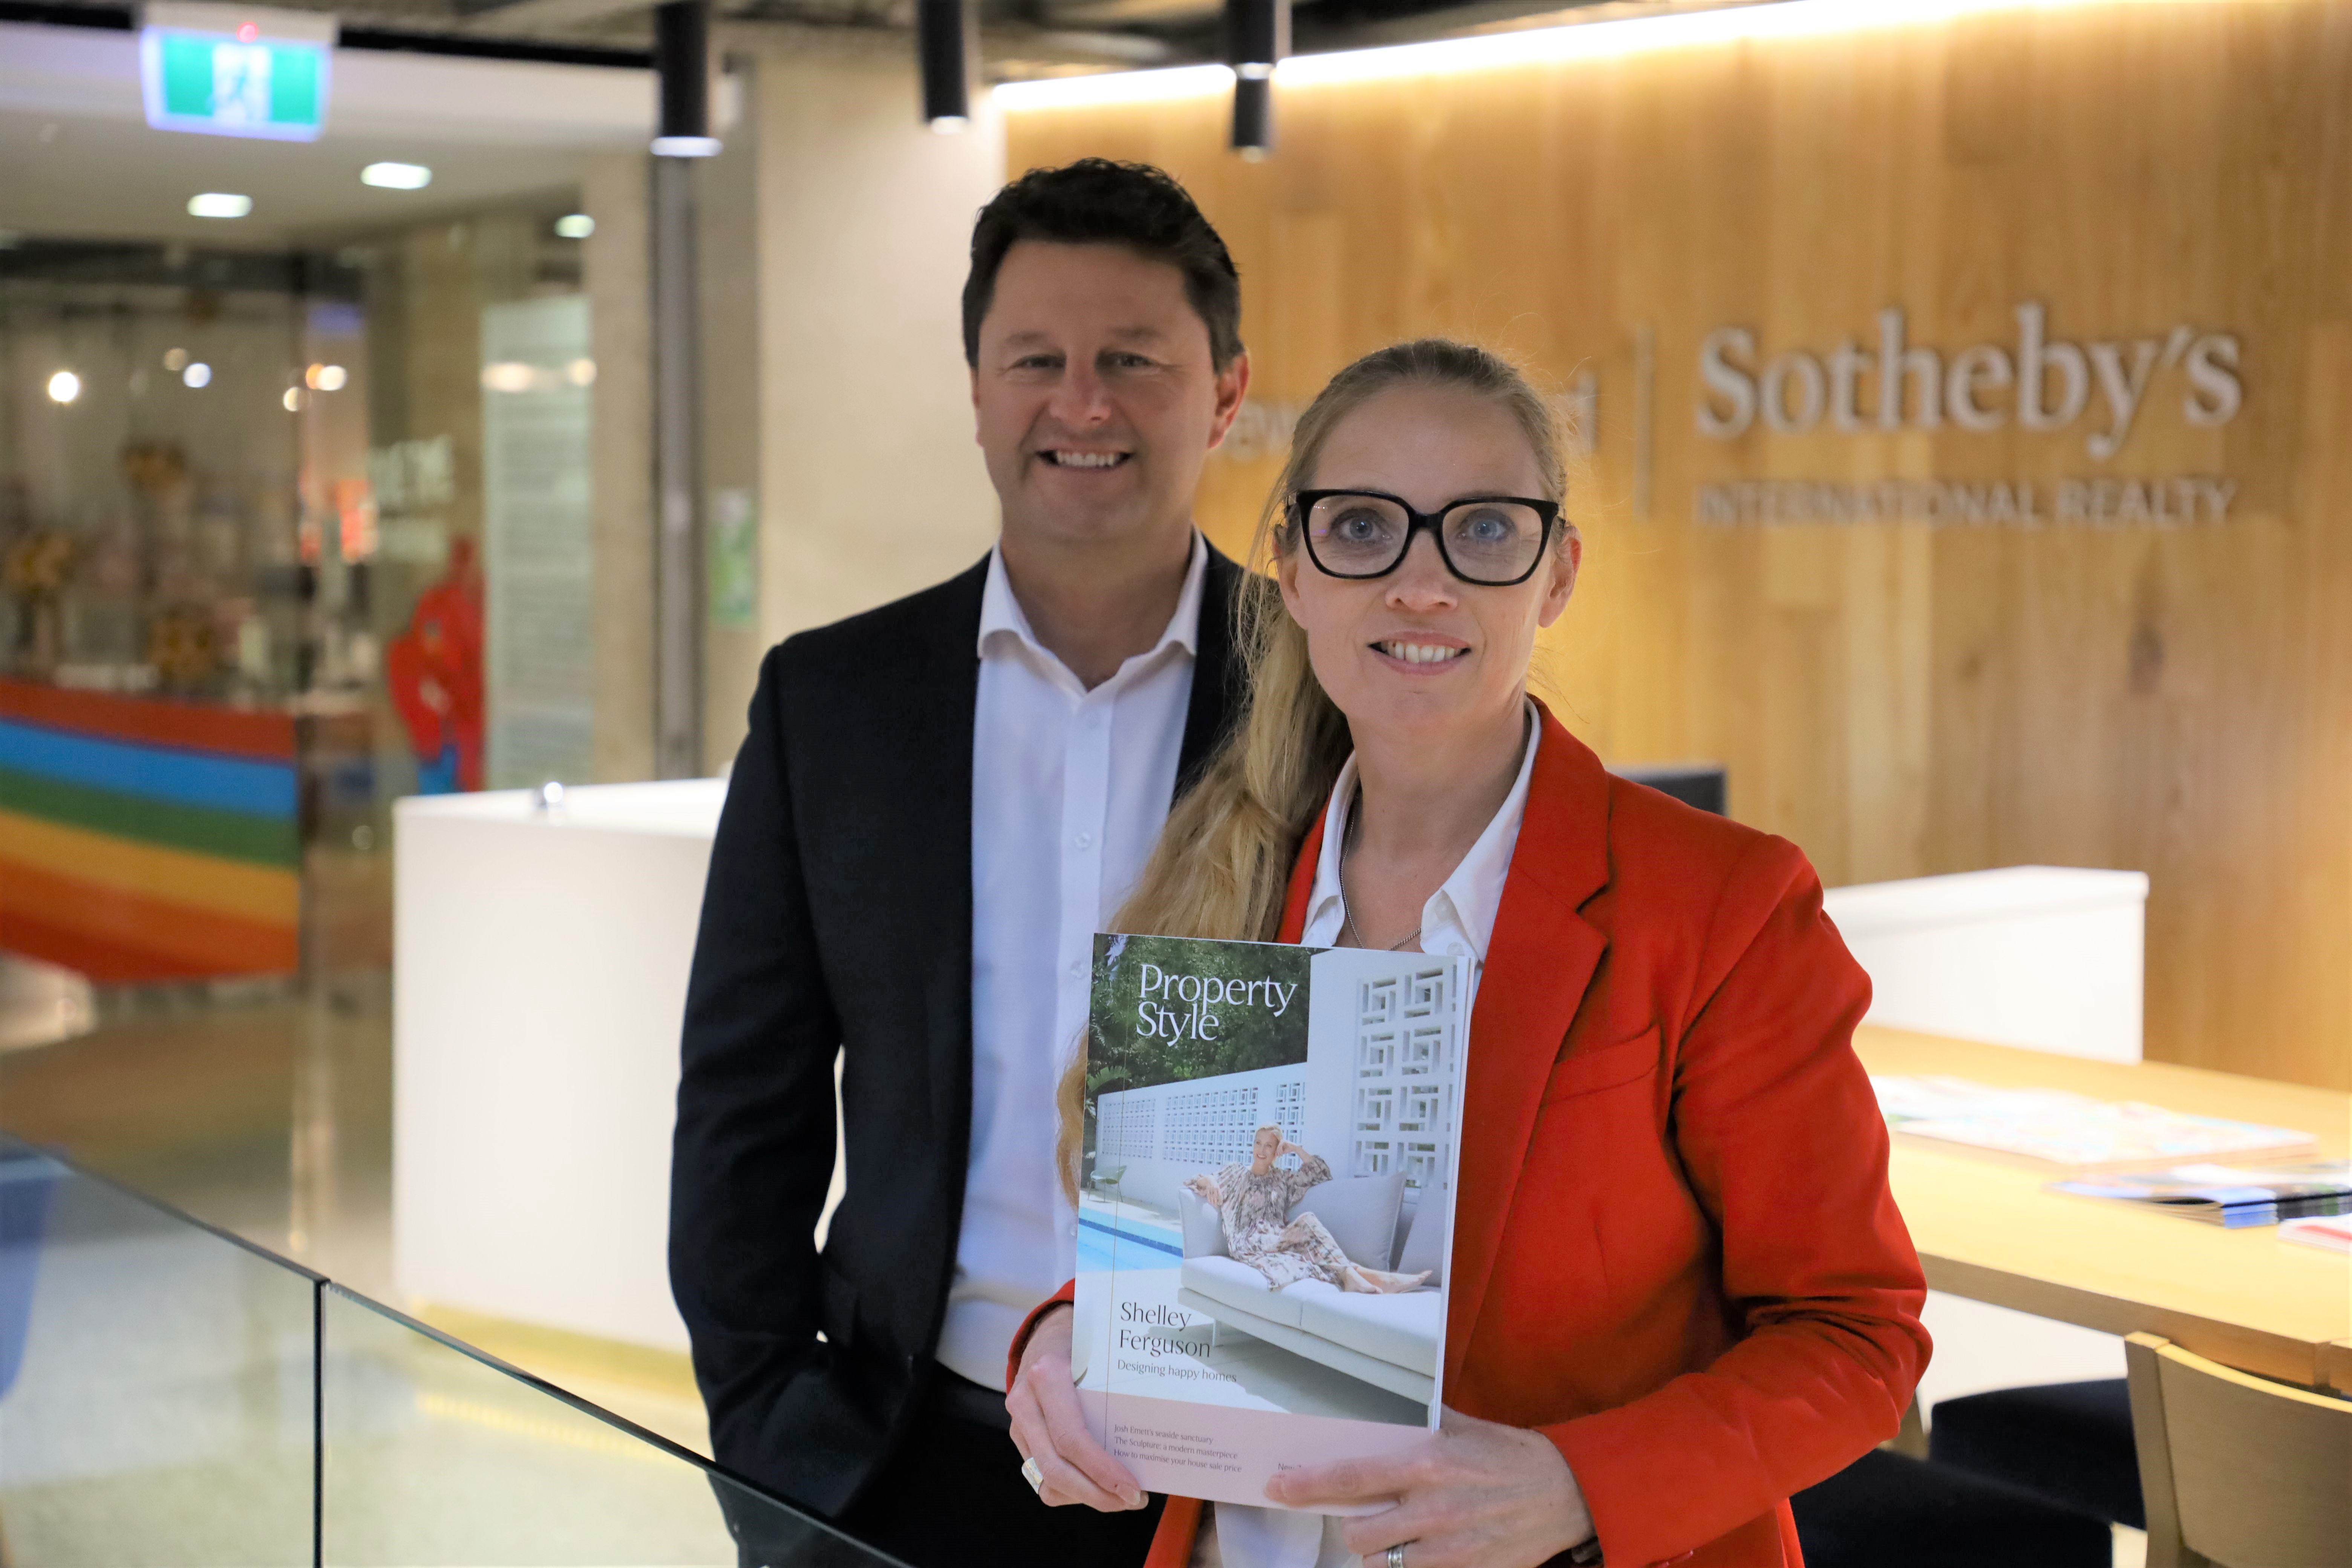 NZ real estate company launches new lifestyle magazine